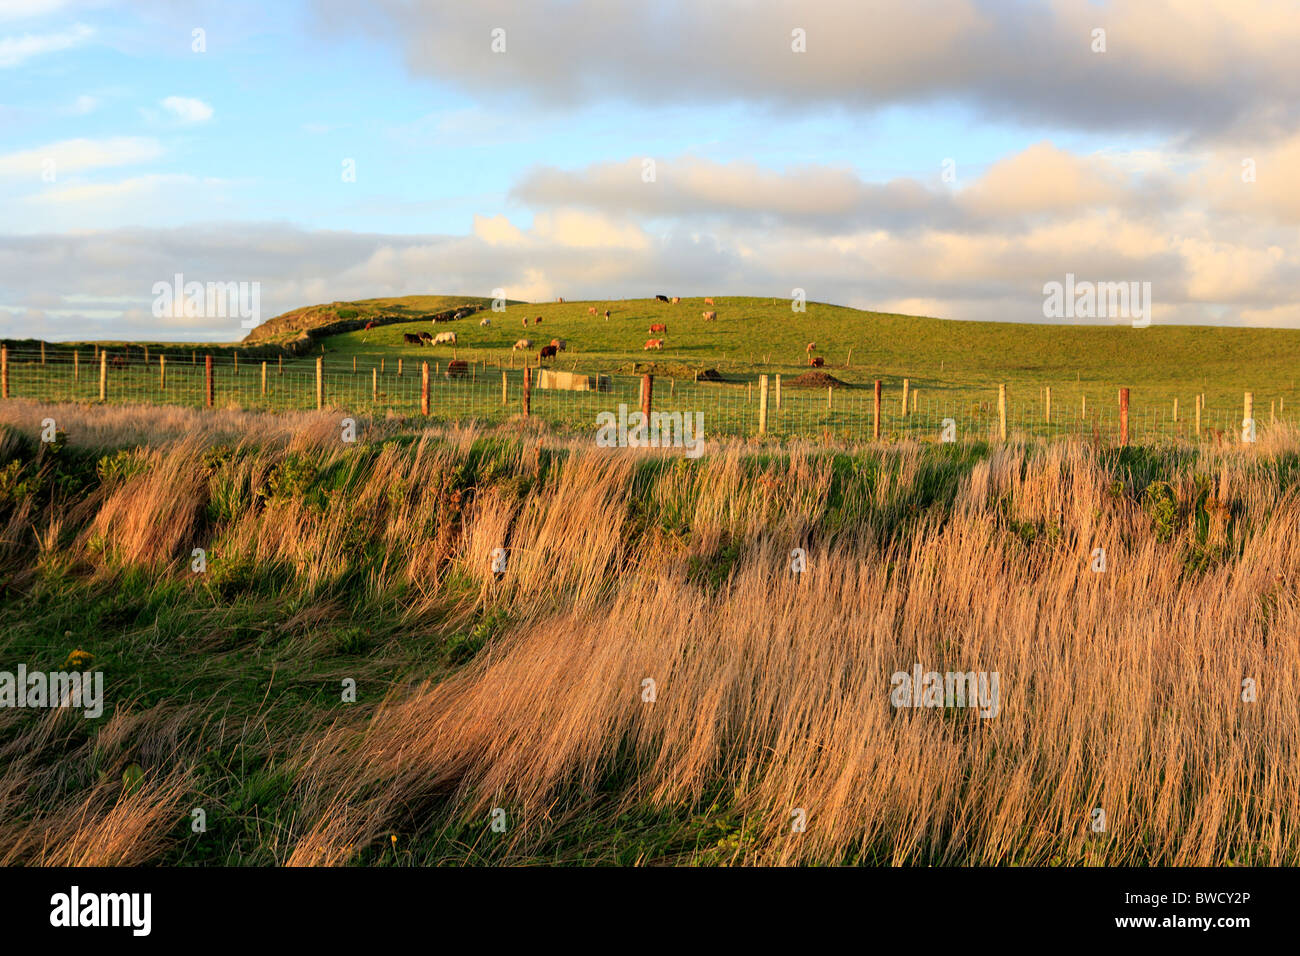 Cliffs of Moher, Clare county, Ireland Stock Photo